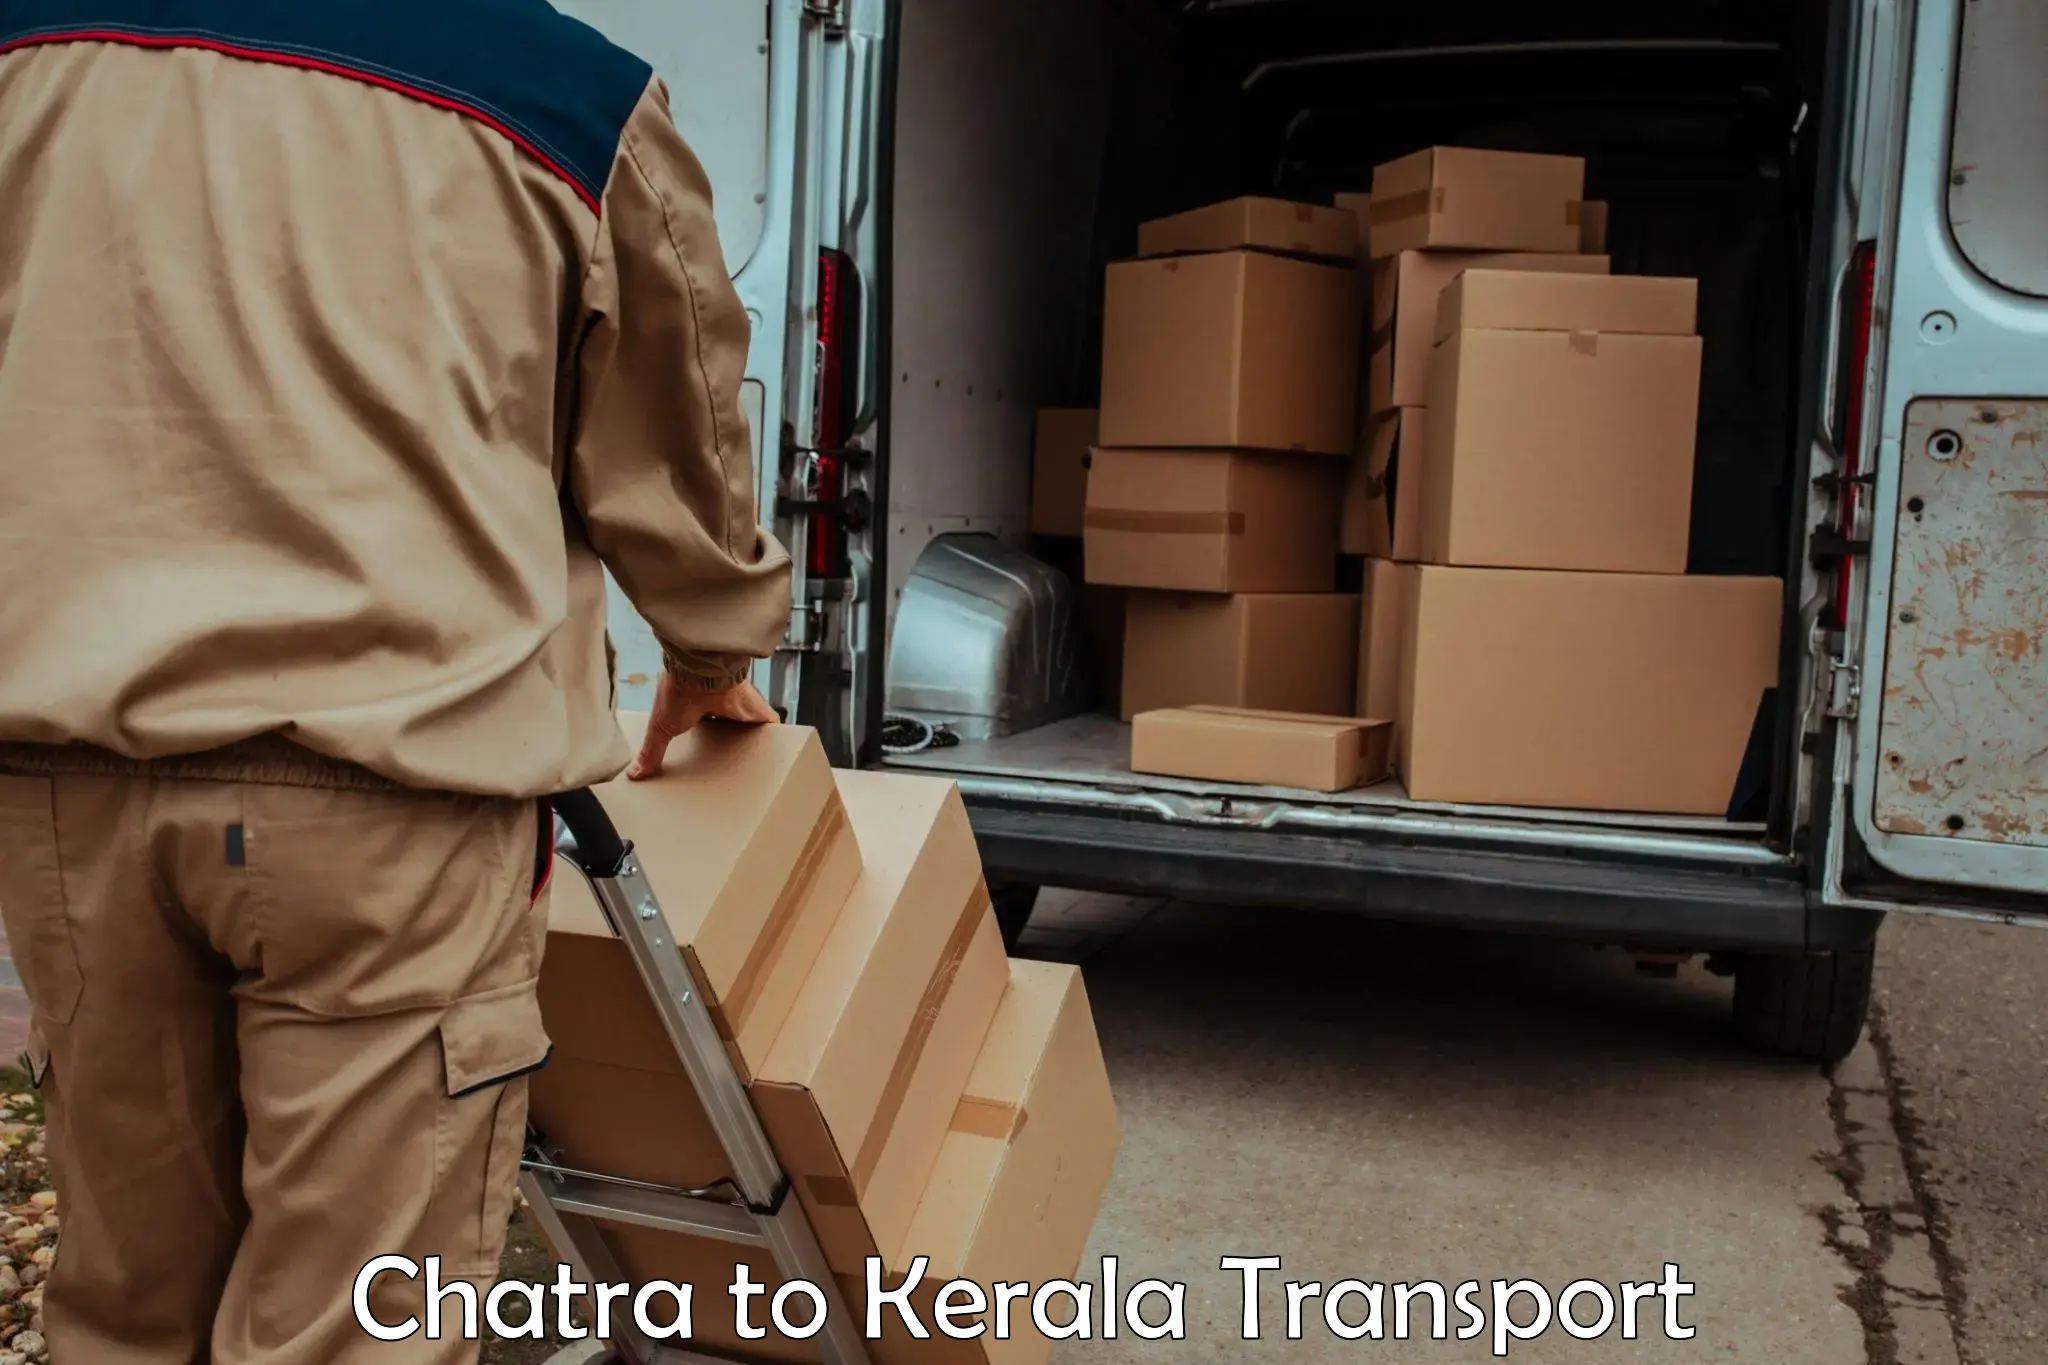 Transport shared services Chatra to Trivandrum